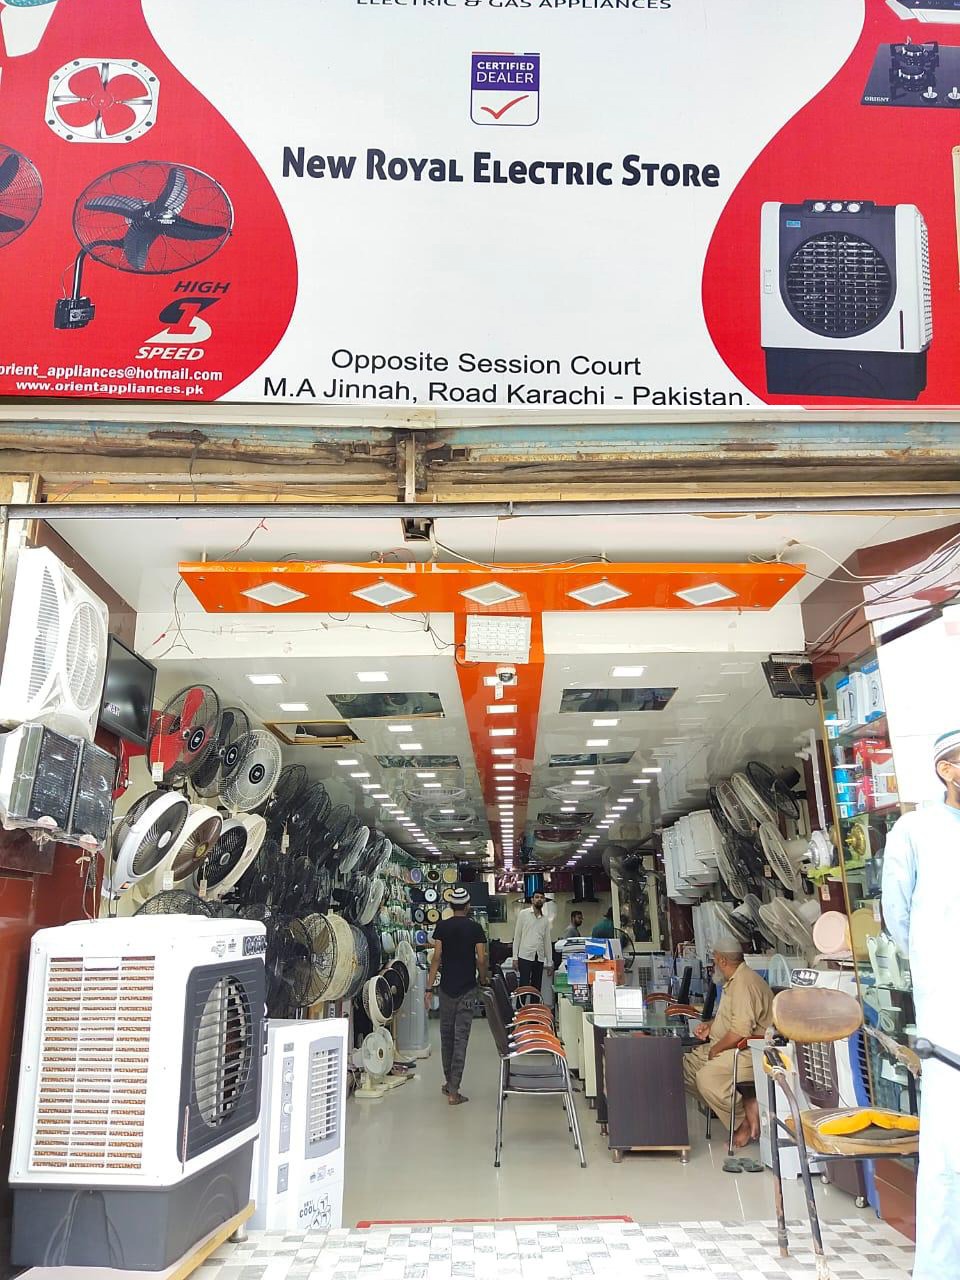 New royal electric store